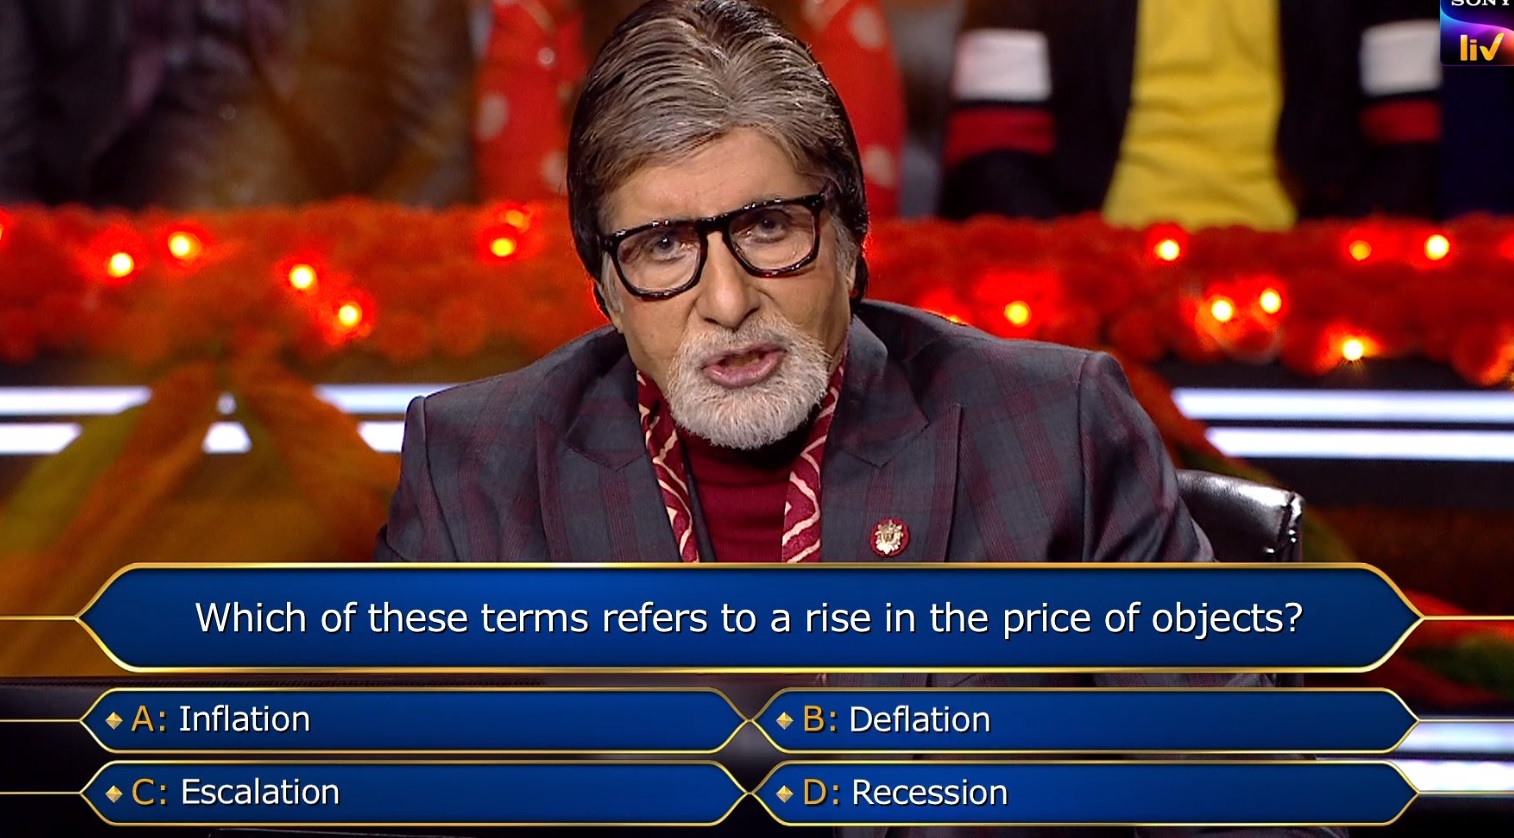 2nd KBC Golden Week Ques : Which of these terms refers to a rise in the price of objects?